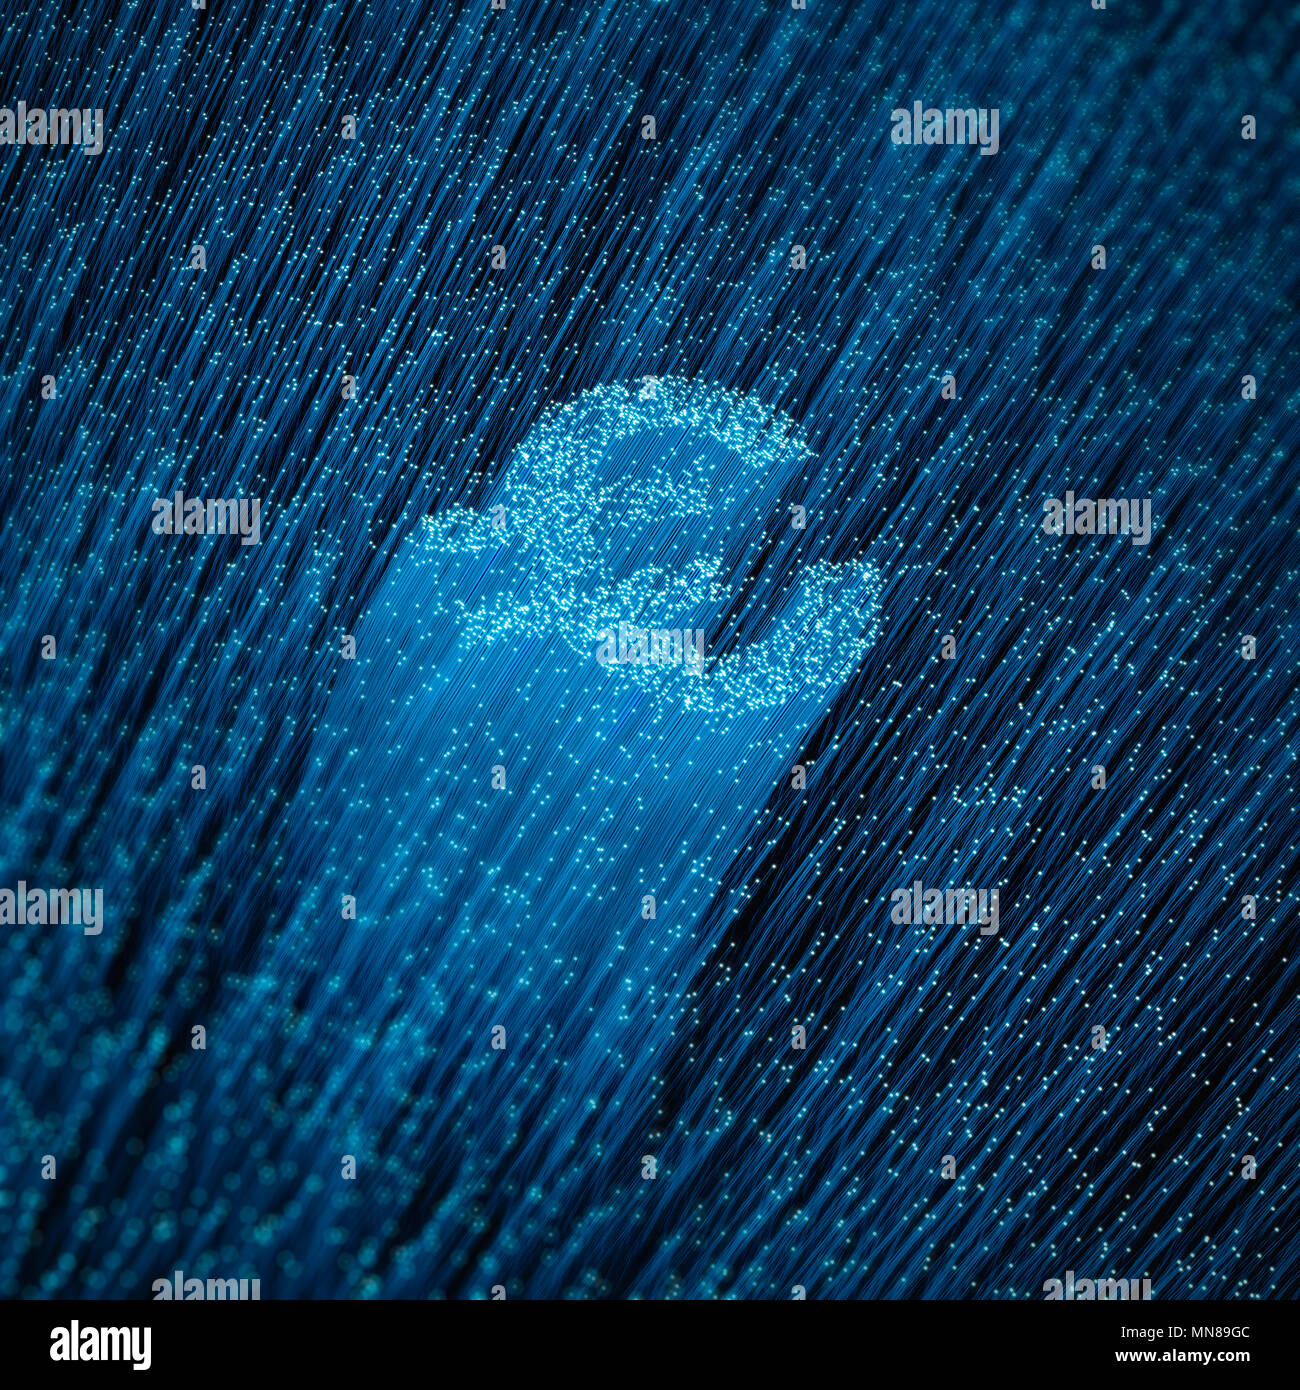 Fiber-optic euro concept / 3D illustration of glowing optical fibres forming European Union euro currency symbol Stock Photo